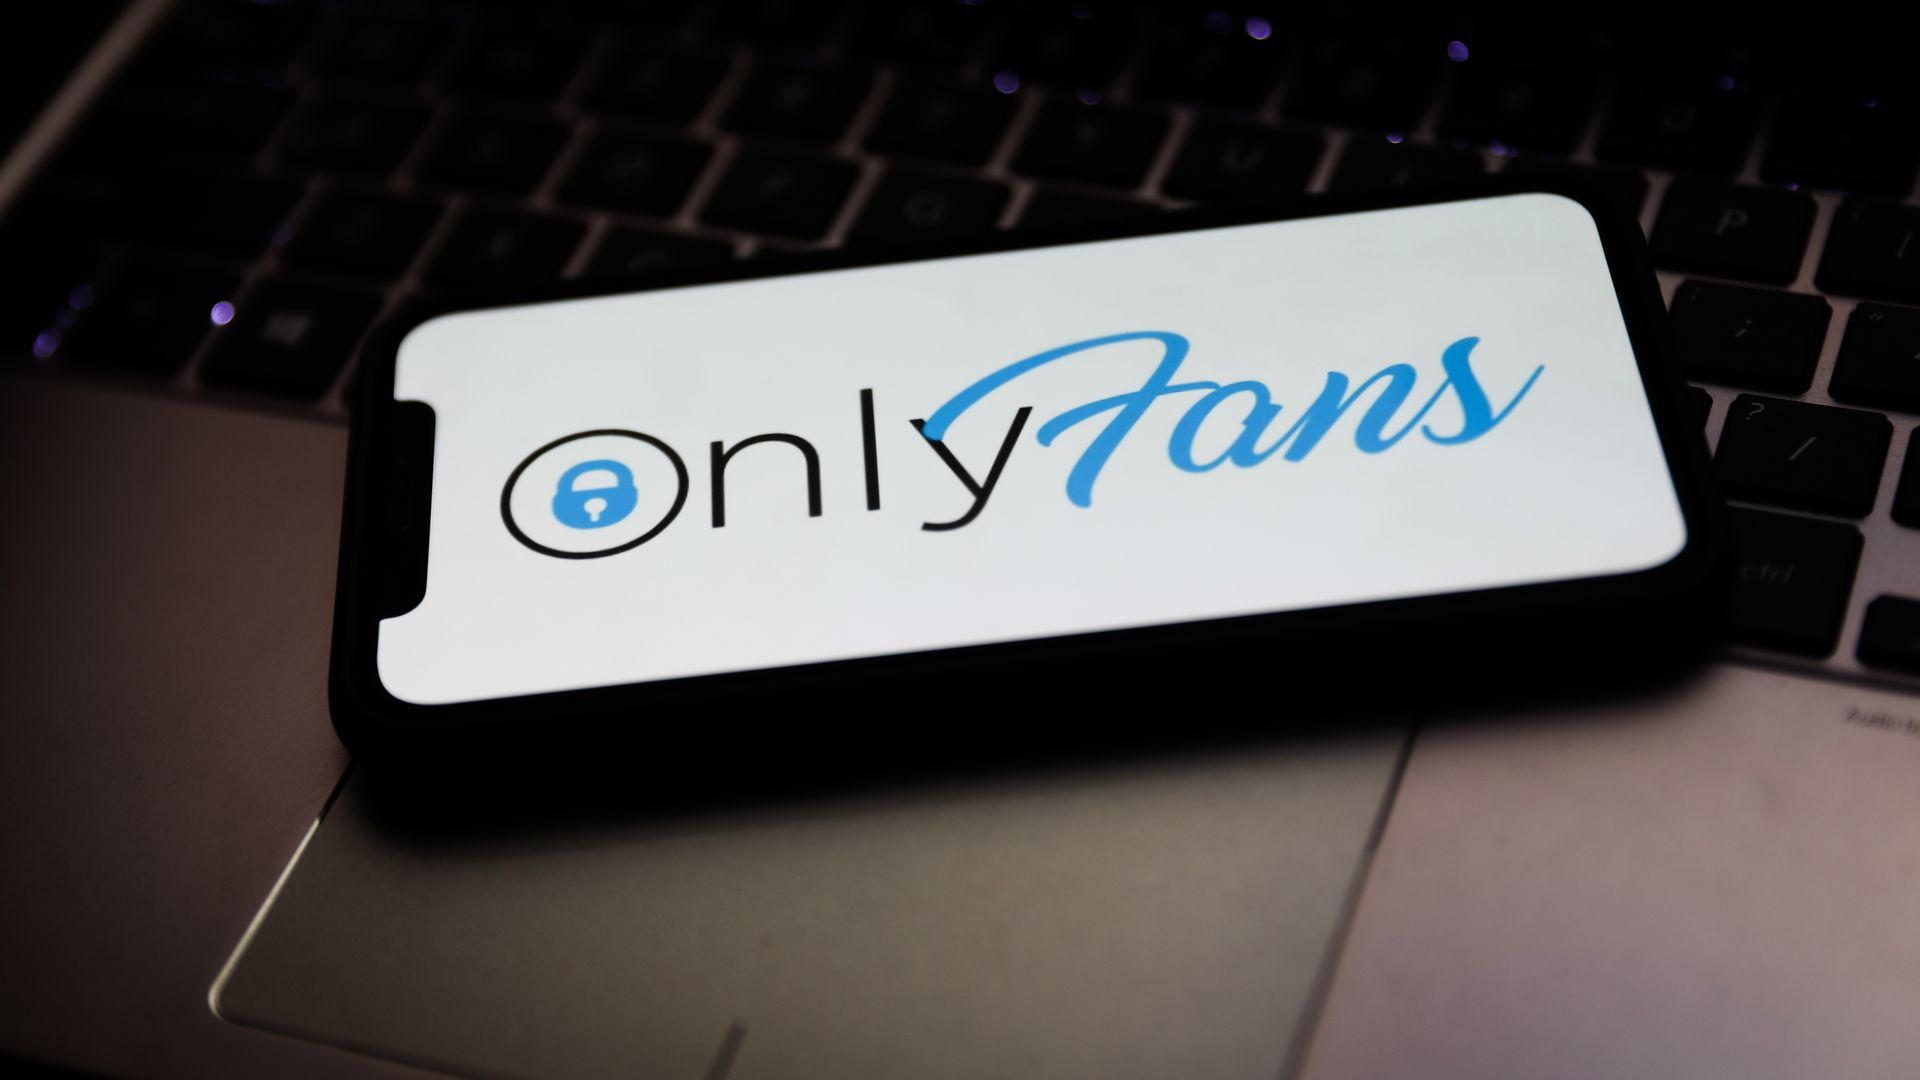 The OnlyFans logo displayed on a phone screen. 